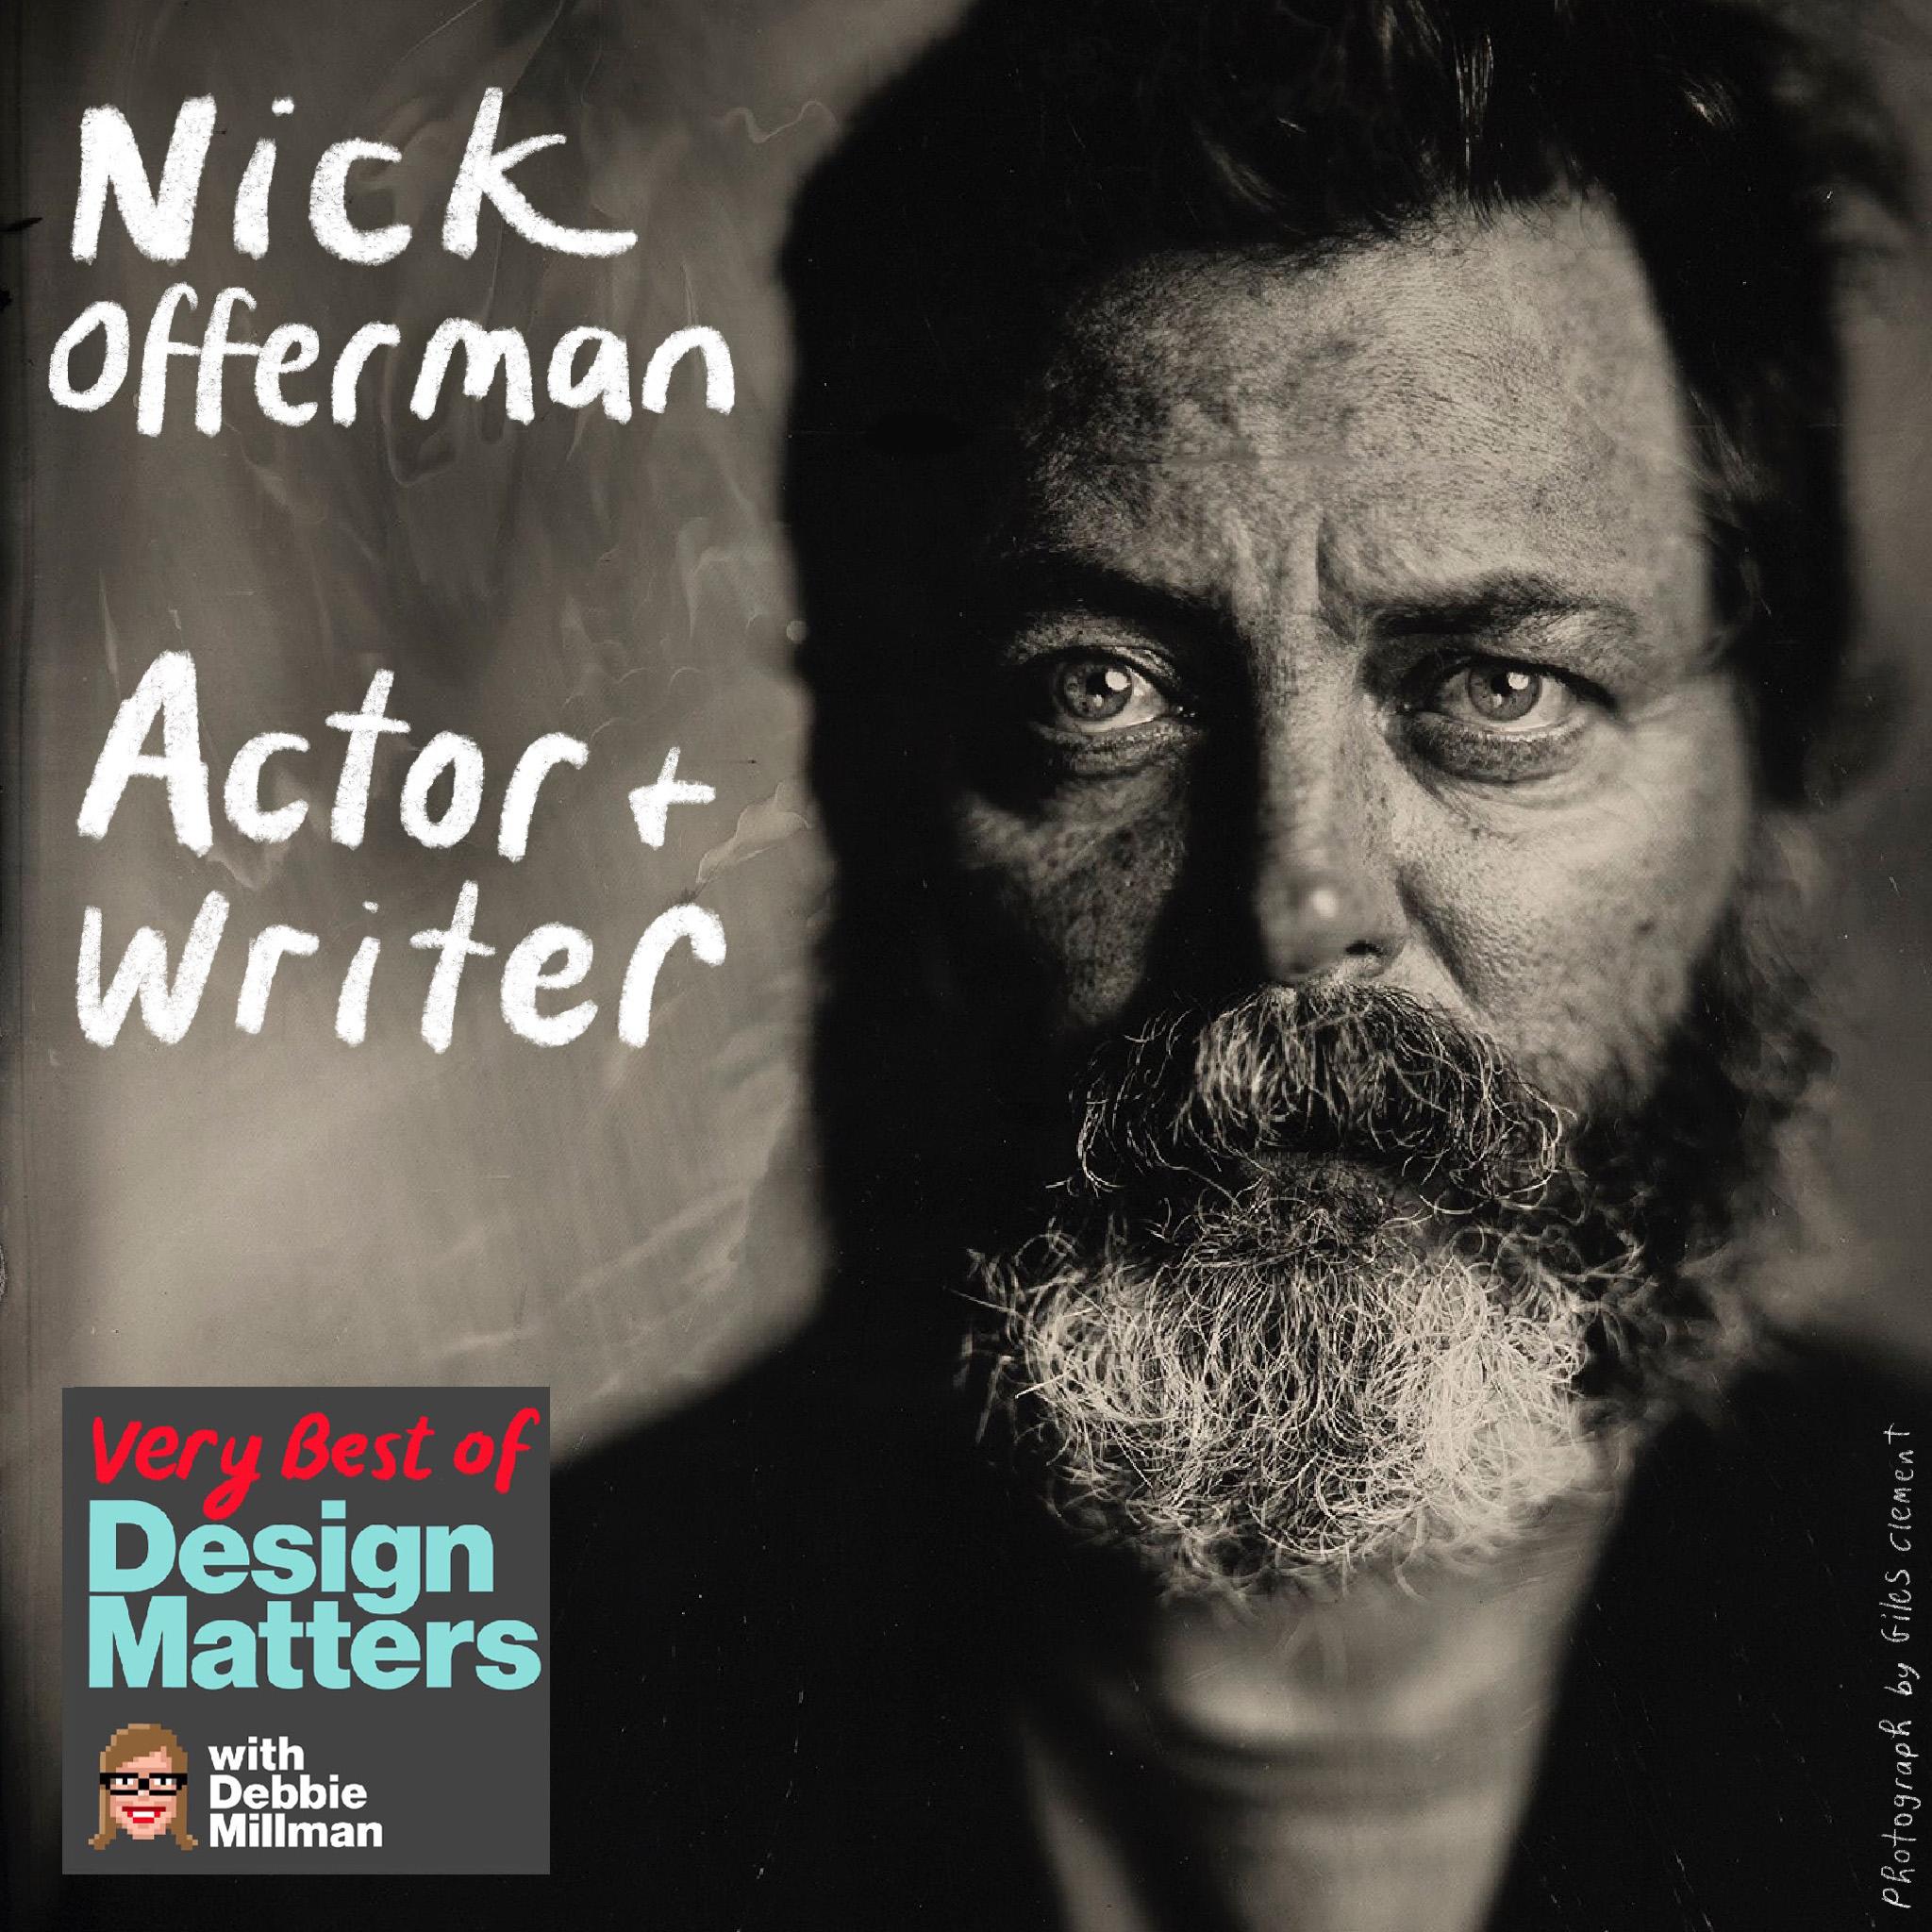 Thumbnail for "Best of Design Matters: Nick Offerman".